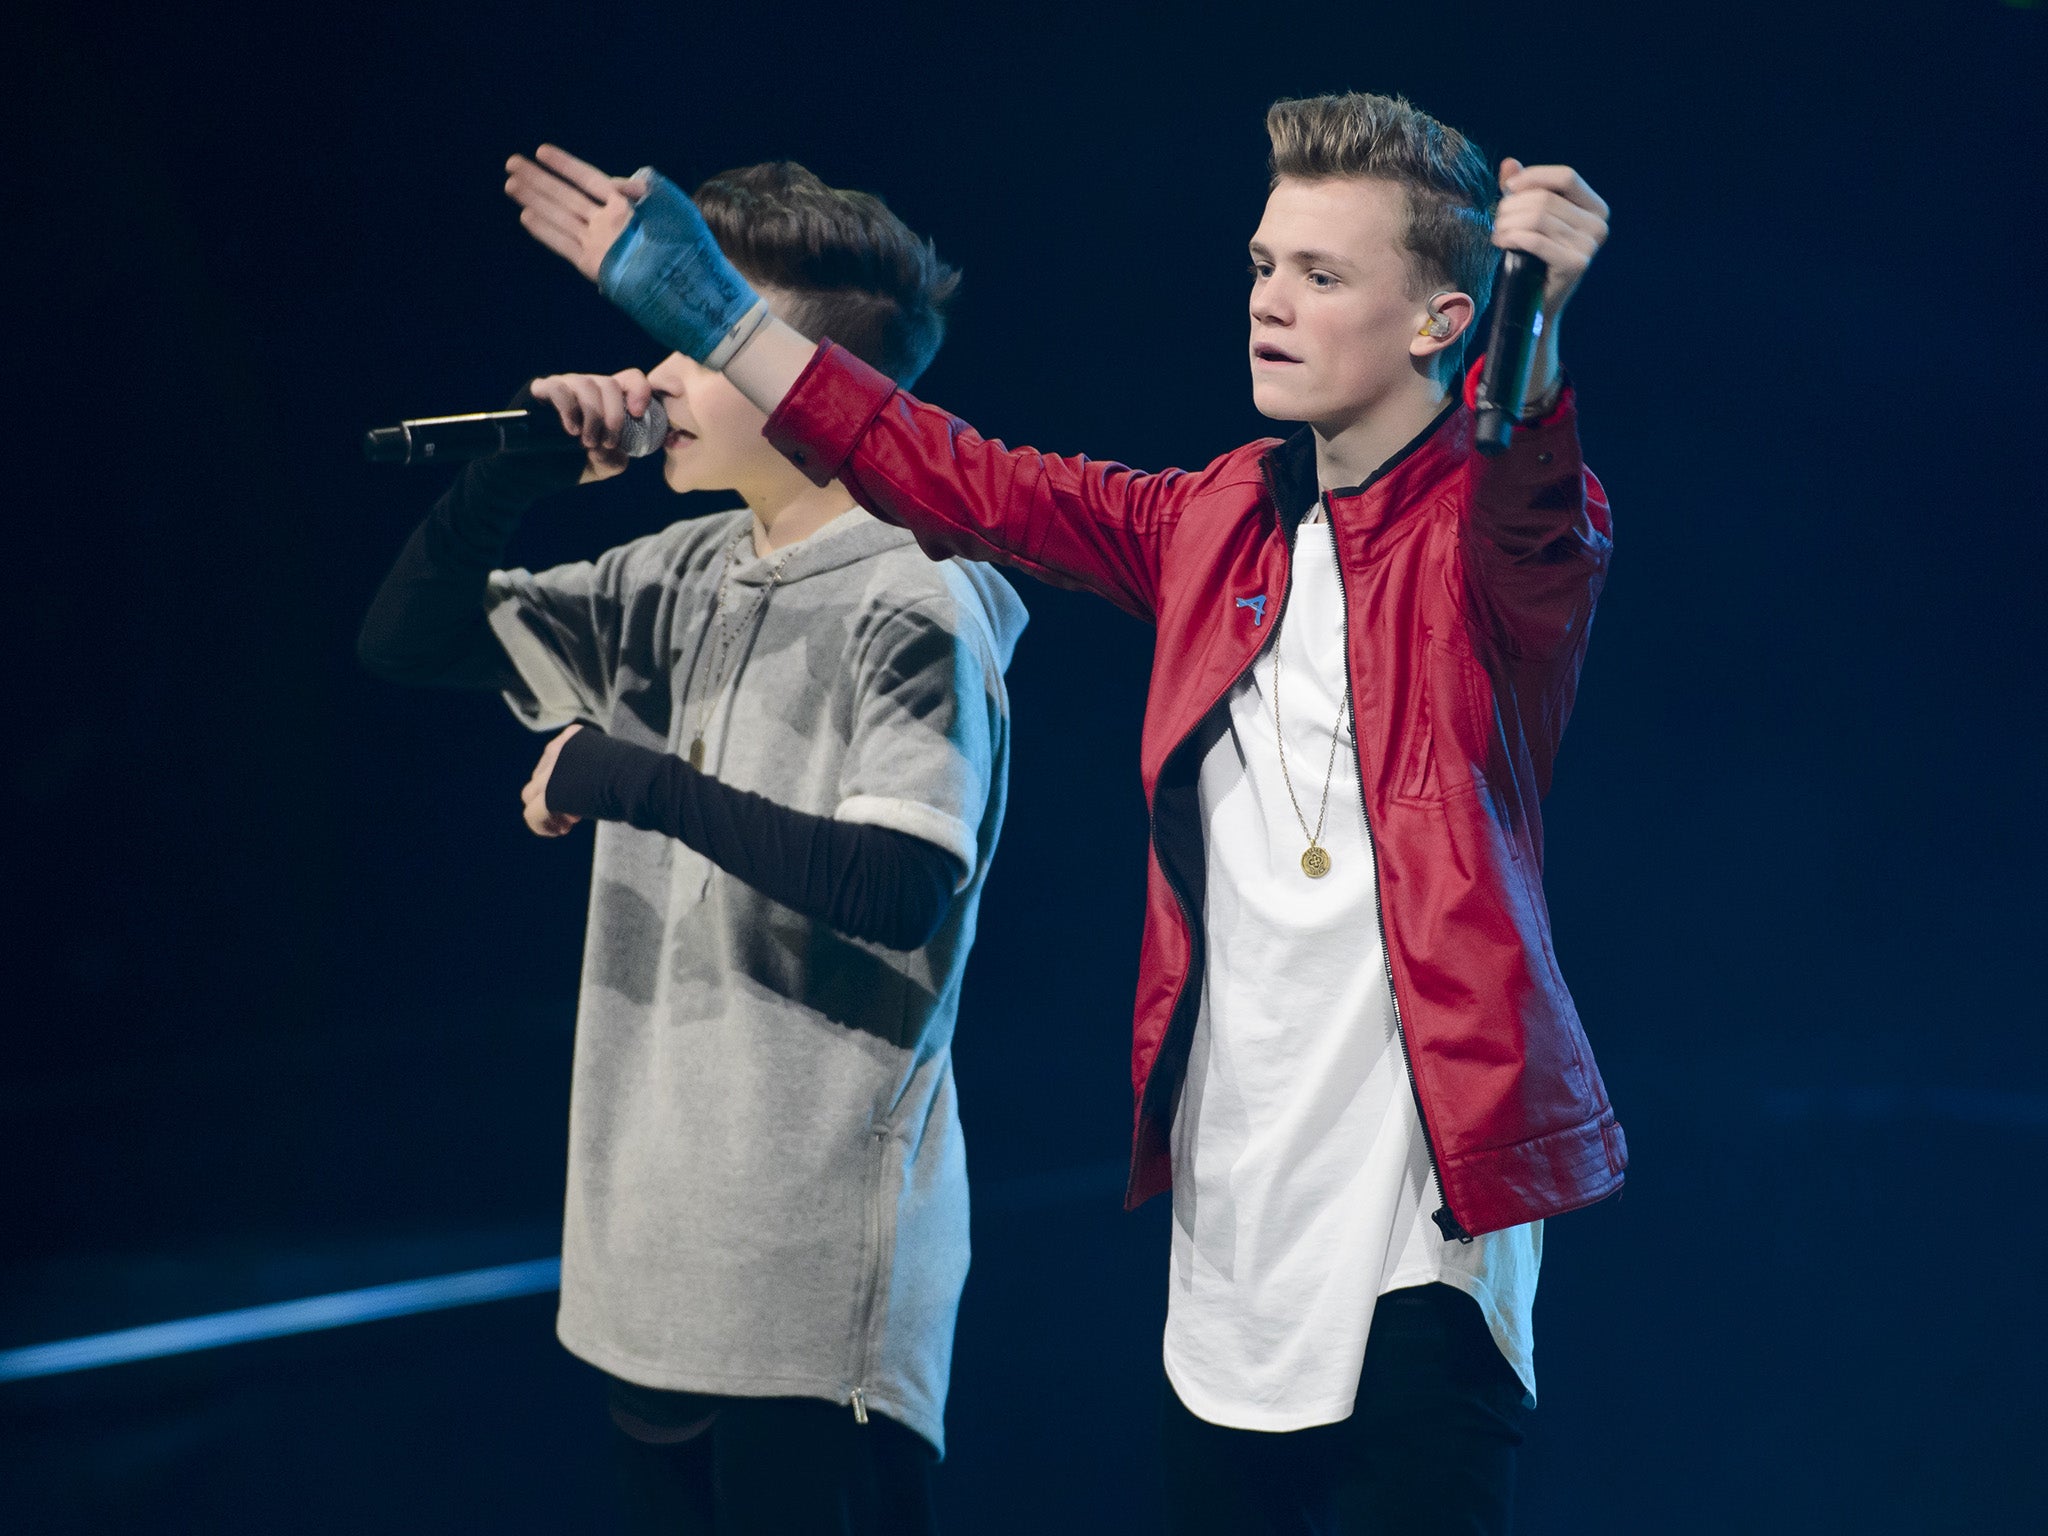 Charlie Lenehan and Leondre Devries of Bars and Melody at We Day 2015 in Wembley